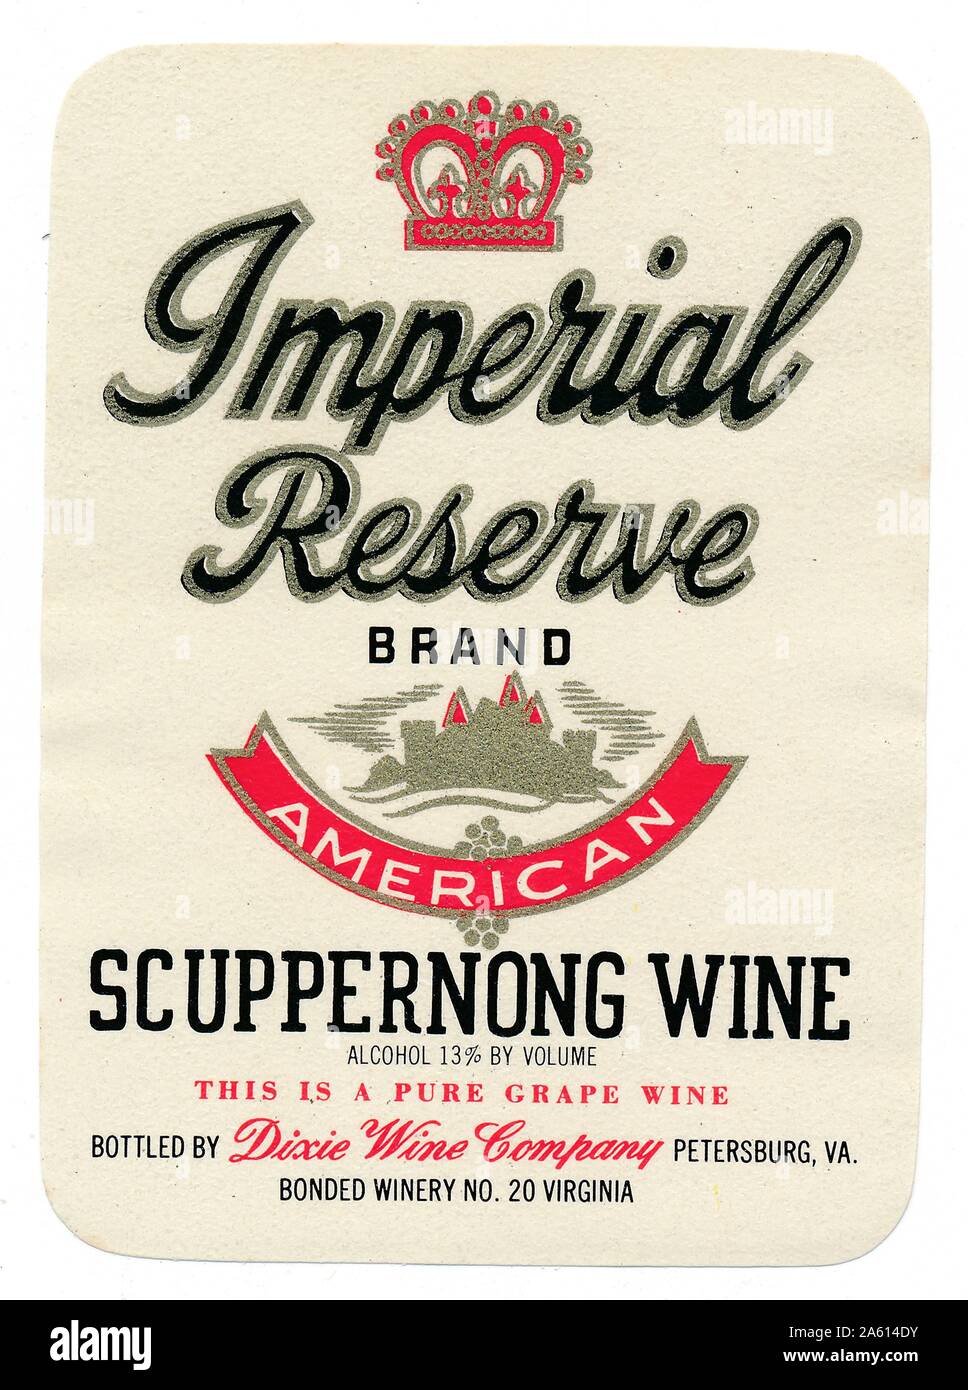 Vintage label for a bottle of 'Imperial Reserve' Scuppernong Wine, with silhouettes of a crown and a castle, bottled by Dixie Wine Company, Petersburg, Virginia, 1945. () Stock Photo